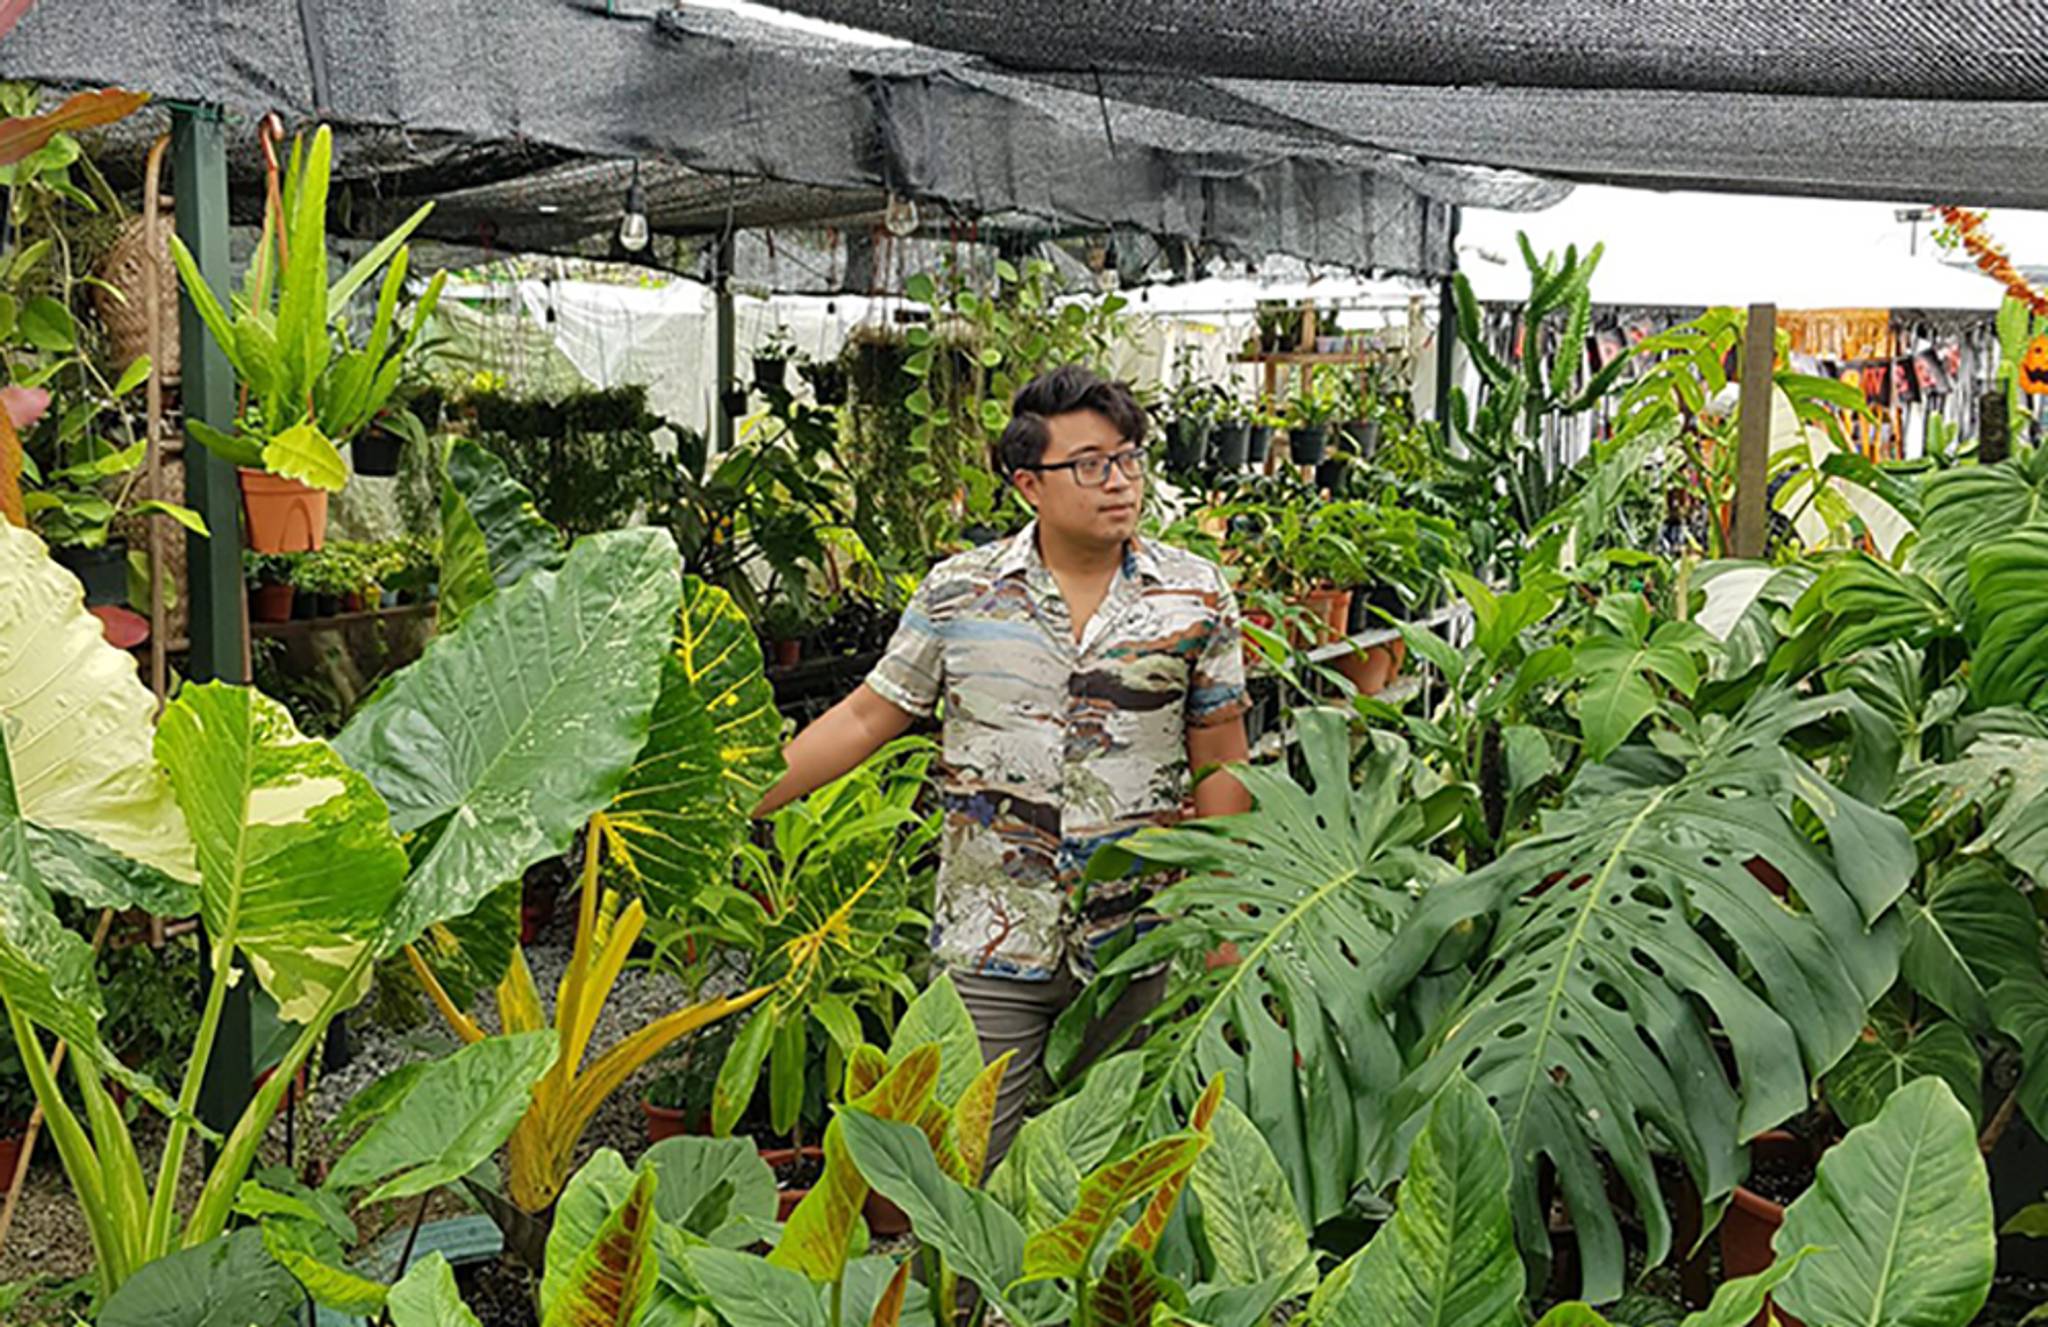 Restless Singaporeans find release in rare plants